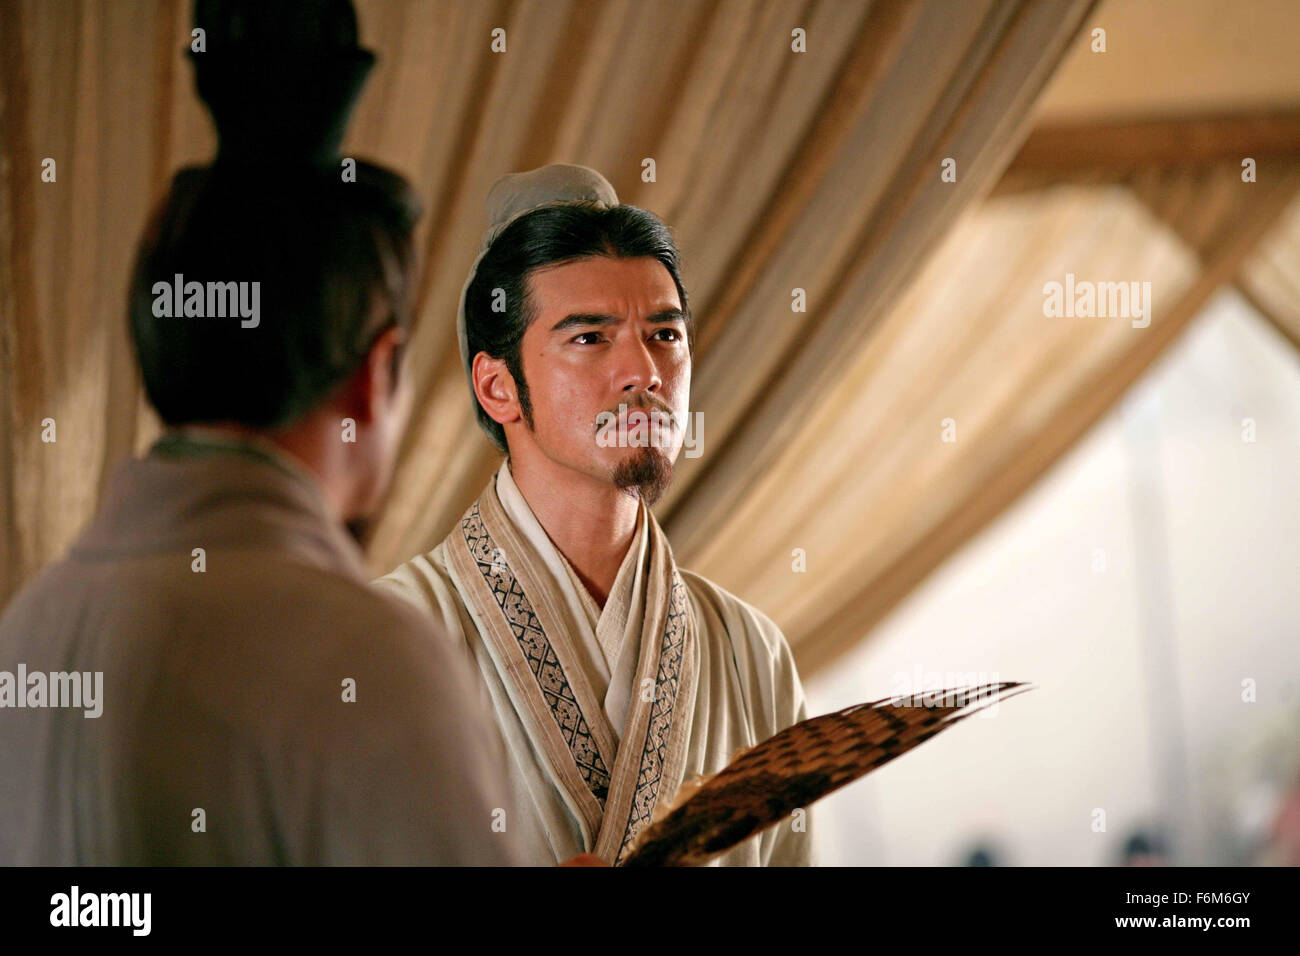 RELEASE DATE: July 10, 2008. MOVIE TITLE: Red Cliff. STUDIO: Avex Entertainment. PLOT: Based on the events during the Three Kingdoms period in Ancient China in which specifically told in the title, The Battle of Red Cliffs. PICTURED: TAKESHI KANESHIRO as Zhuge Liang. Stock Photo